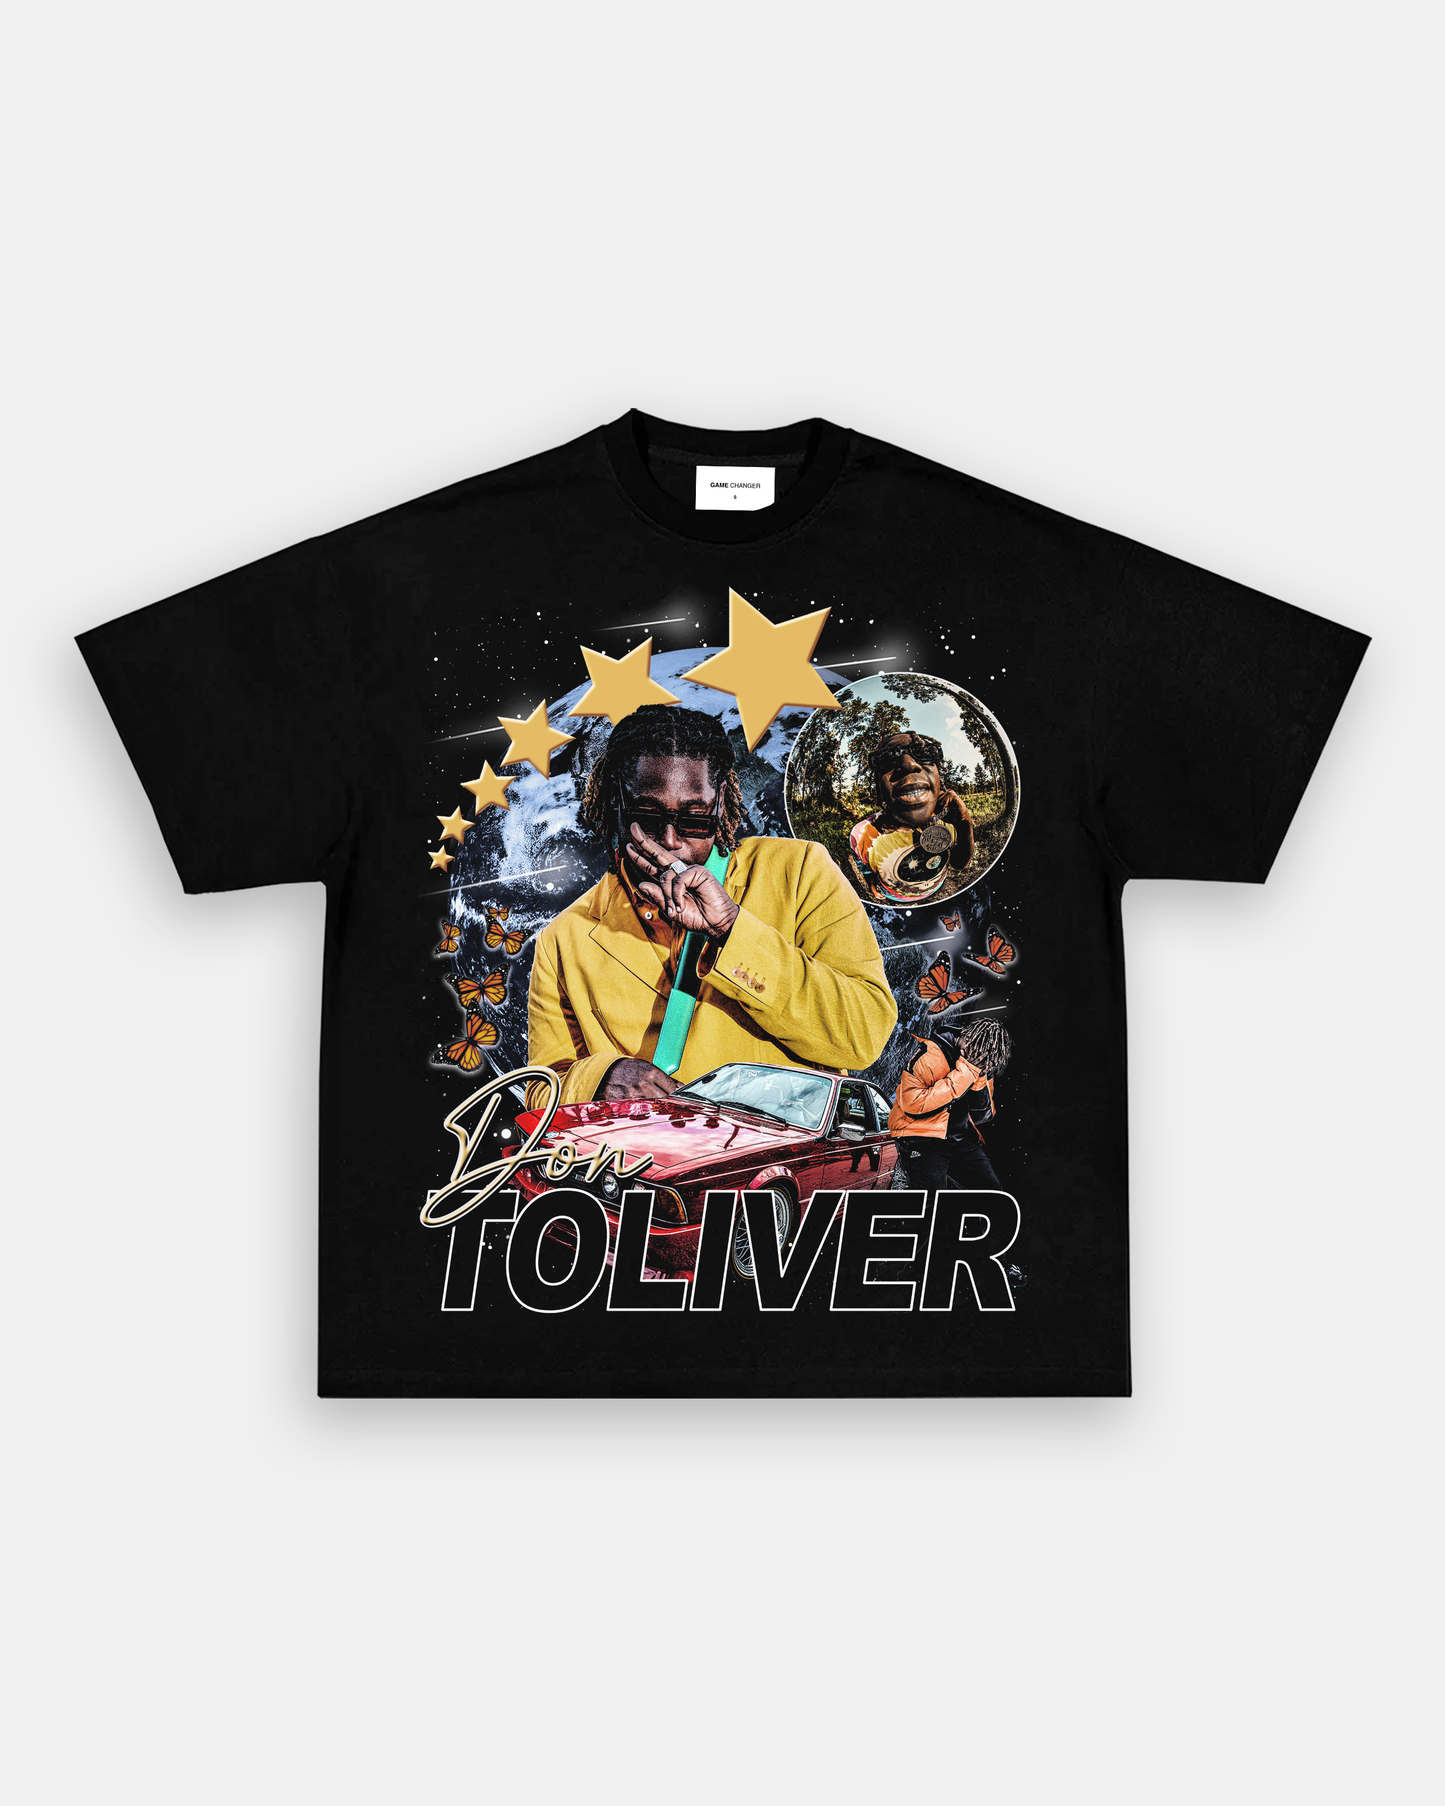 DON TOLIVER TEE